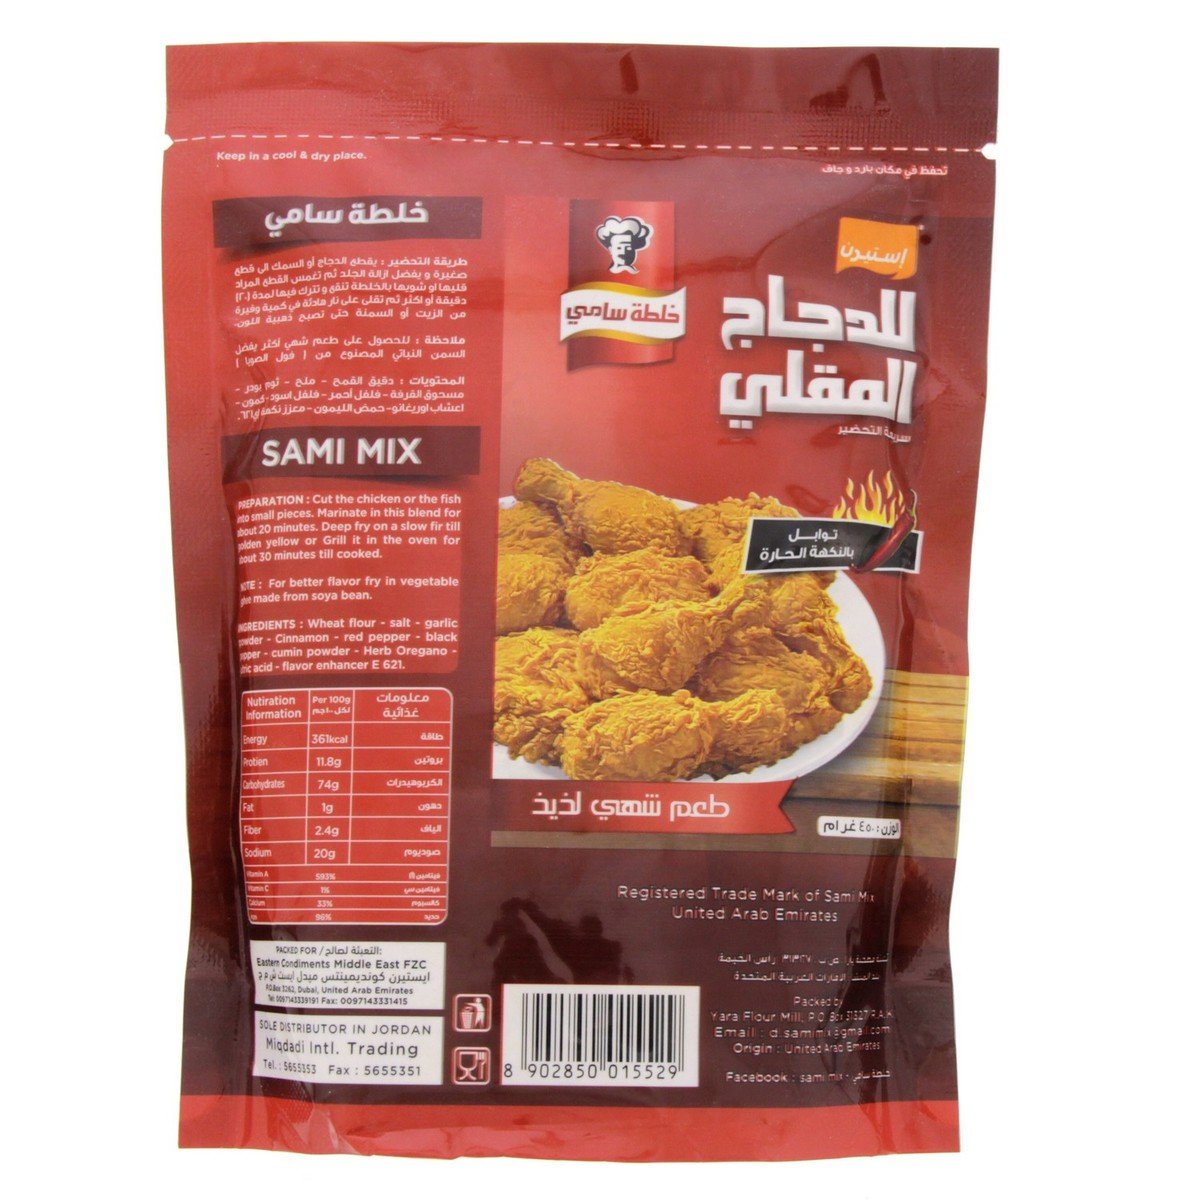 Eastern Fried Chicken Coating Hot & Spicy Mix 450 g